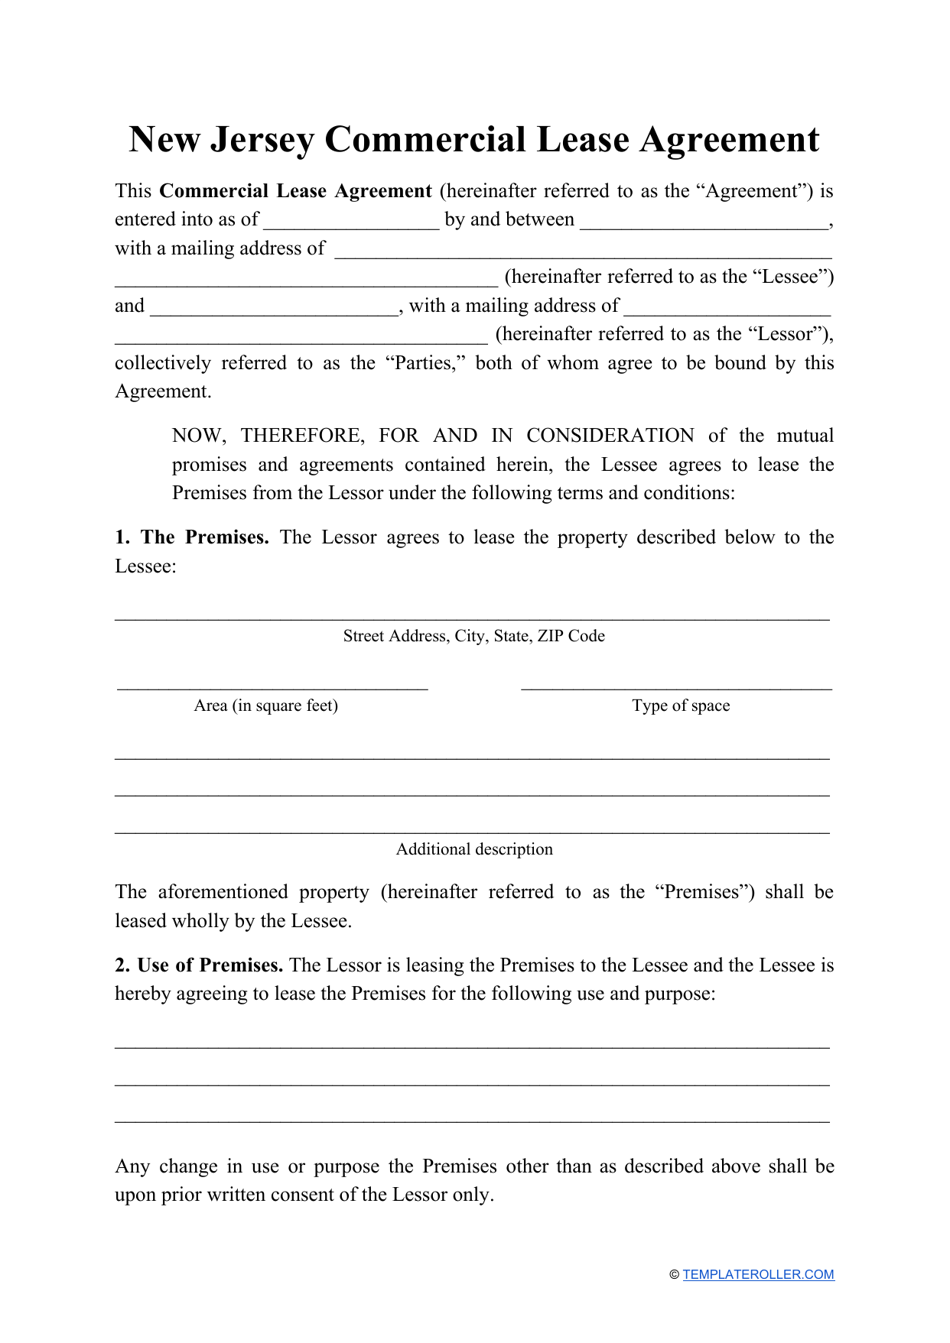 Commercial Lease Agreement Template - New Jersey, Page 1